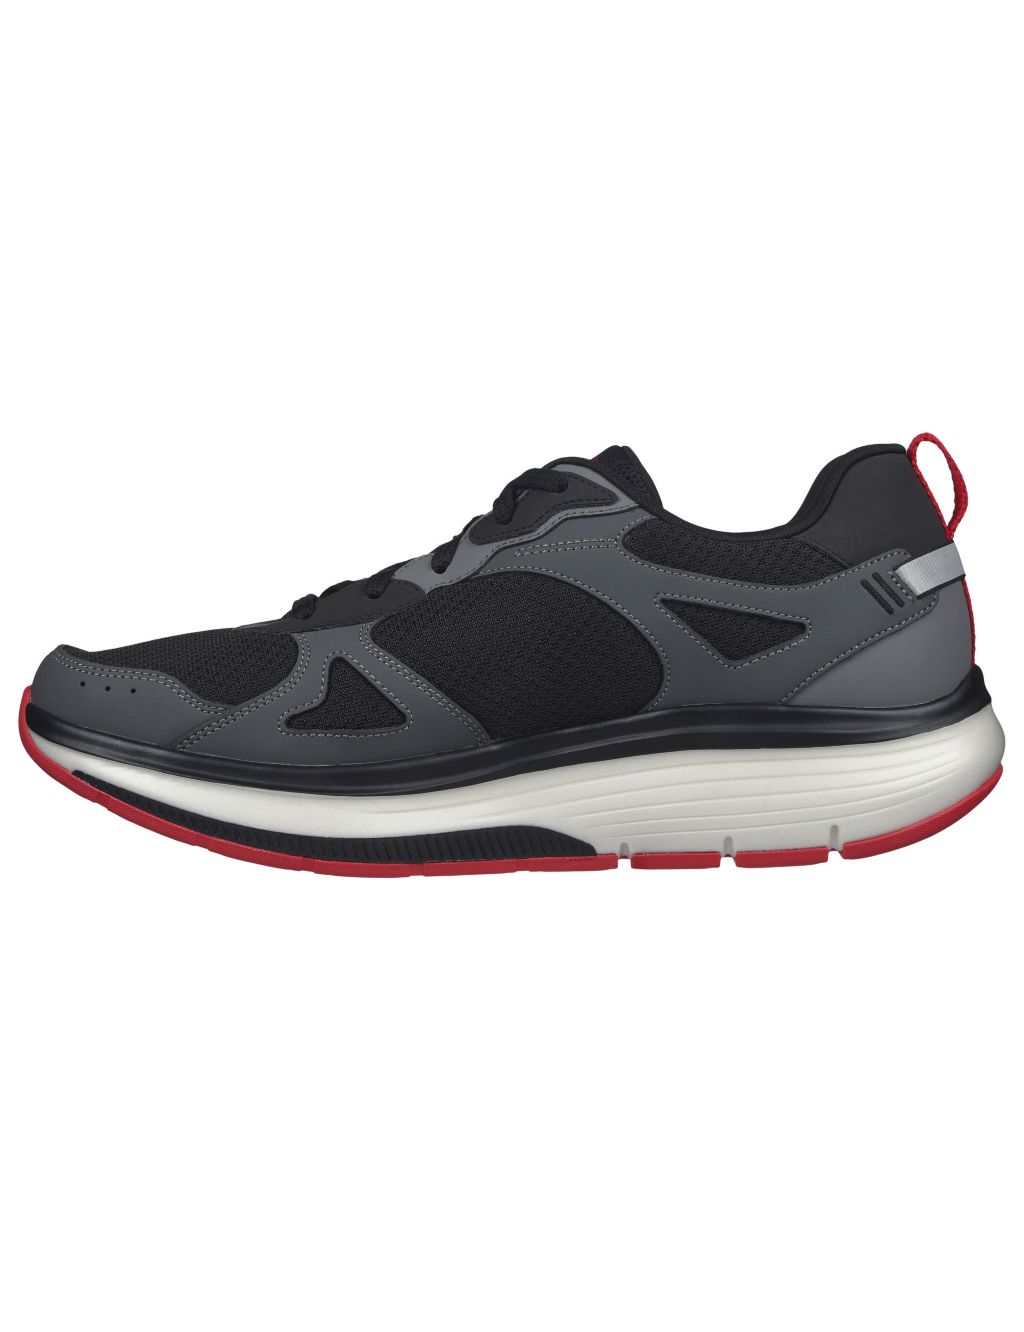 GO WALK Workout Walker Leather Trainers image 5